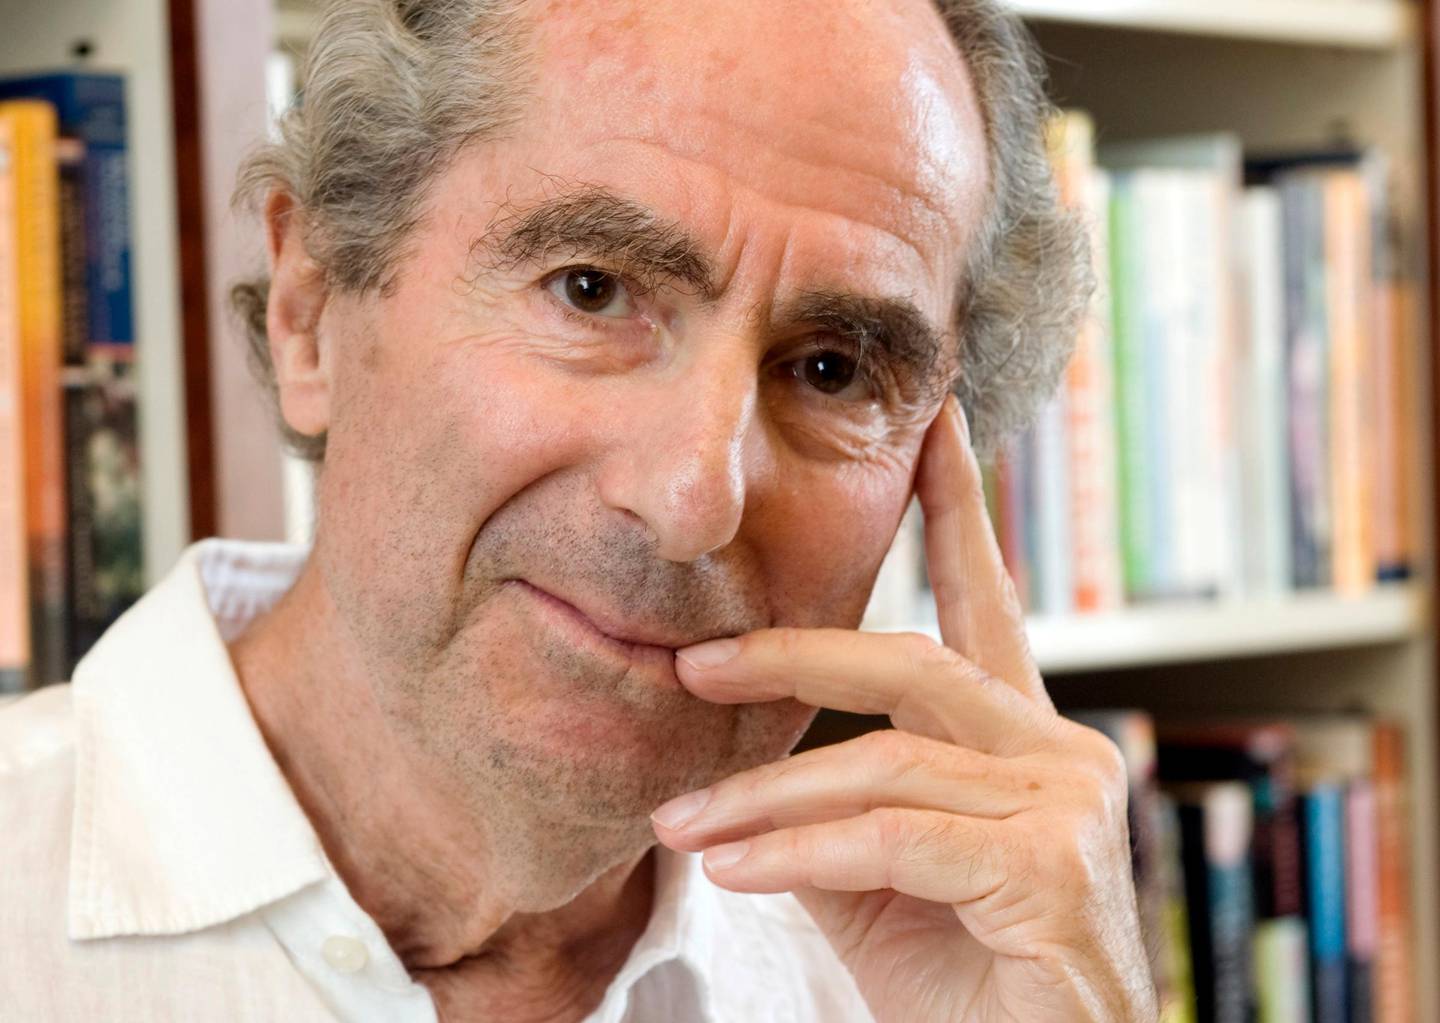 FILE - In this Sept. 8, 2008, file photo, author Philip Roth poses for a photo in the offices of his publisher, Houghton Mifflin, in New York. Roth, prize-winning novelist and fearless narrator of sex, religion and mortality, has died at age 85, his literary agent said Tuesday, May 22, 2018. (AP Photo/Richard Drew, File)